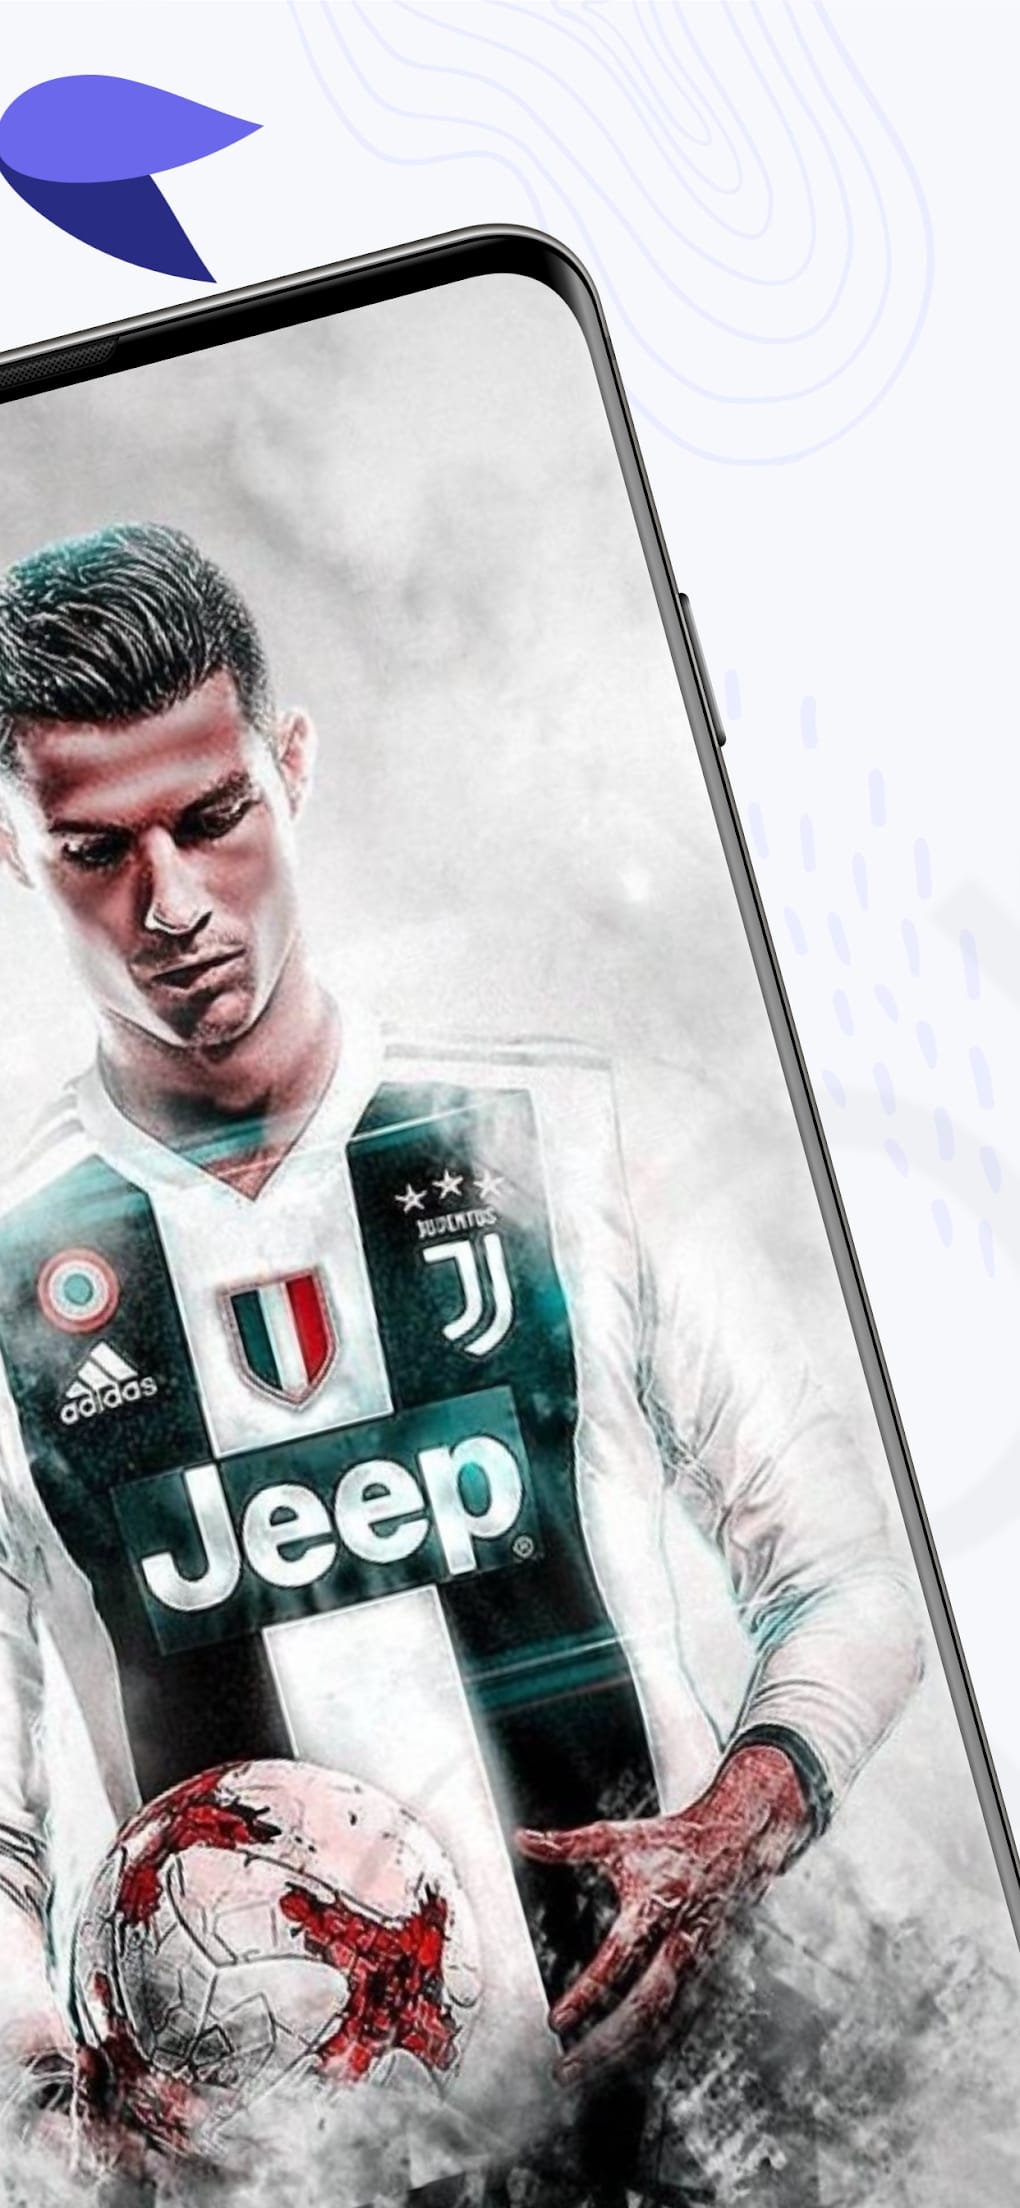 Best Cristiano Ronaldo Wallpapers All Time 36 Photos